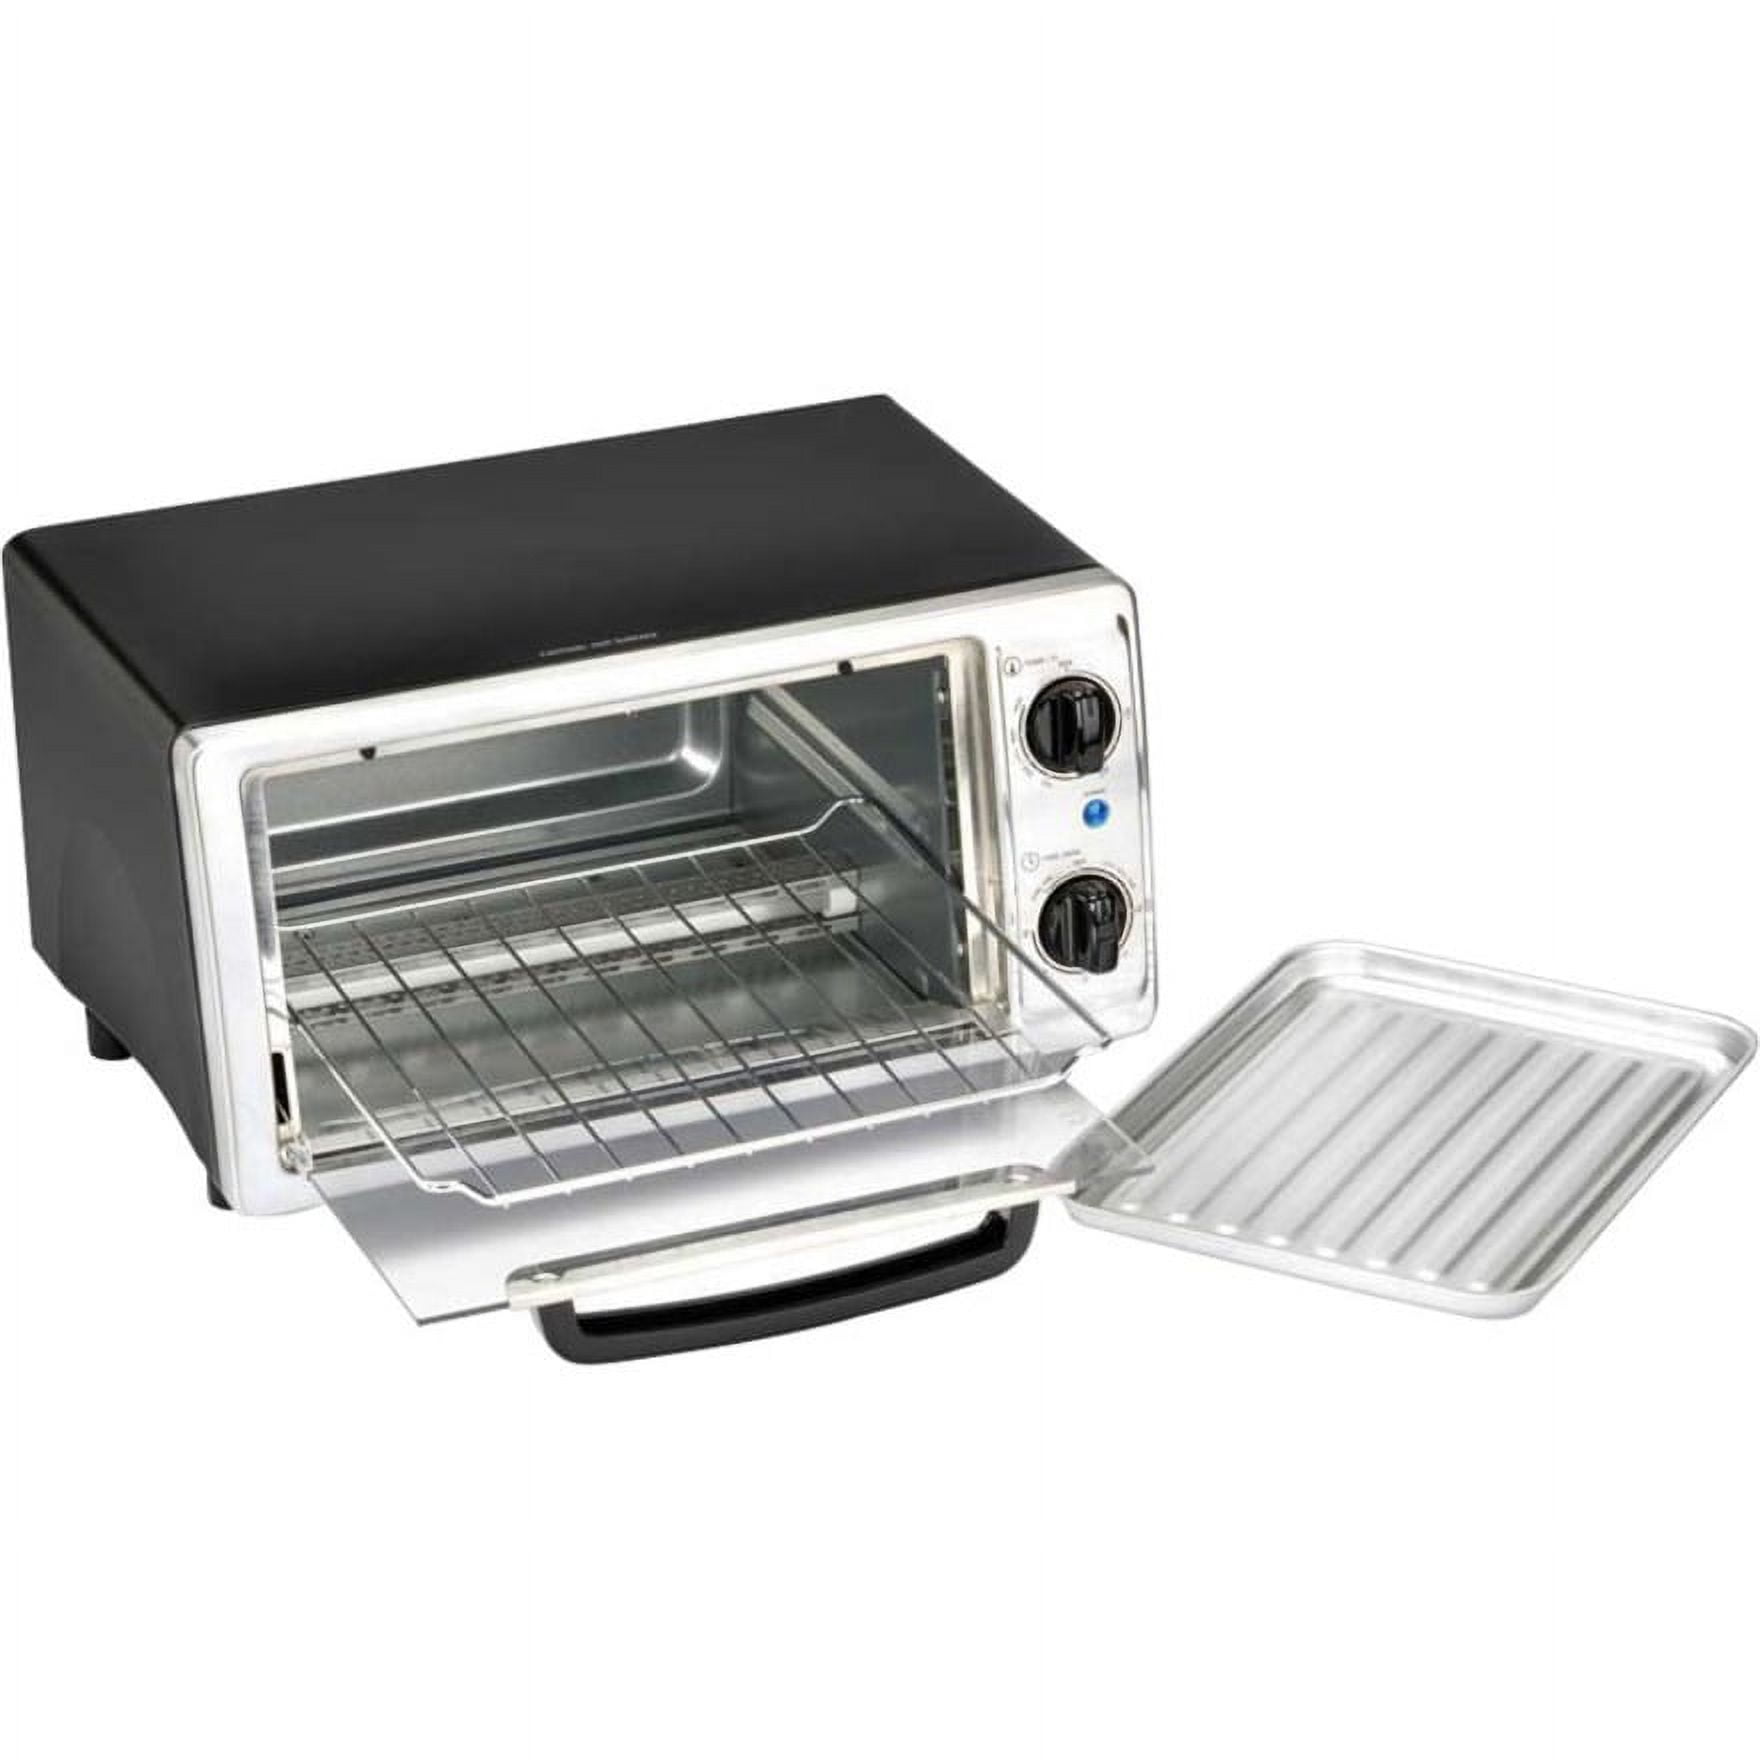 Toastmaster Extra Large Capacity Toaster Oven